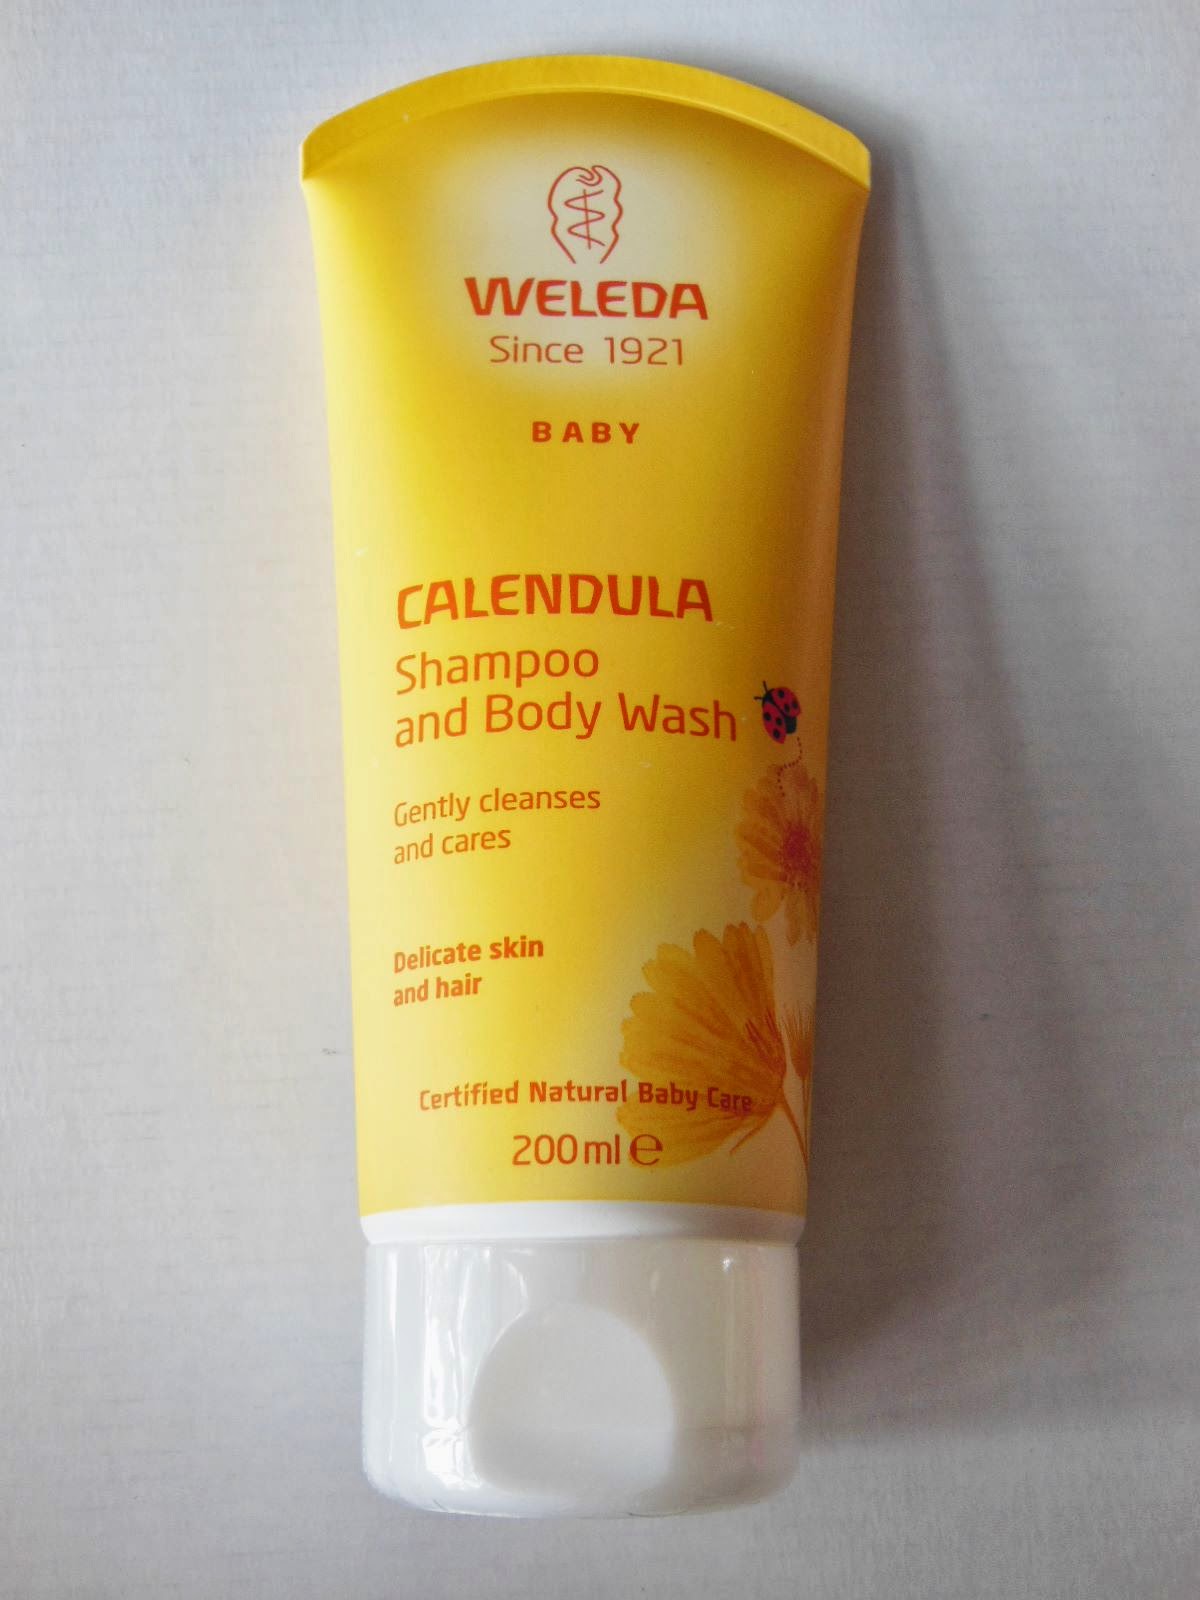 Mange Brutal Planet Product Review: Weleda Baby Calendula Shampoo and Body Wash and Baby Oil |  The Beauty & Lifestyle Hunter